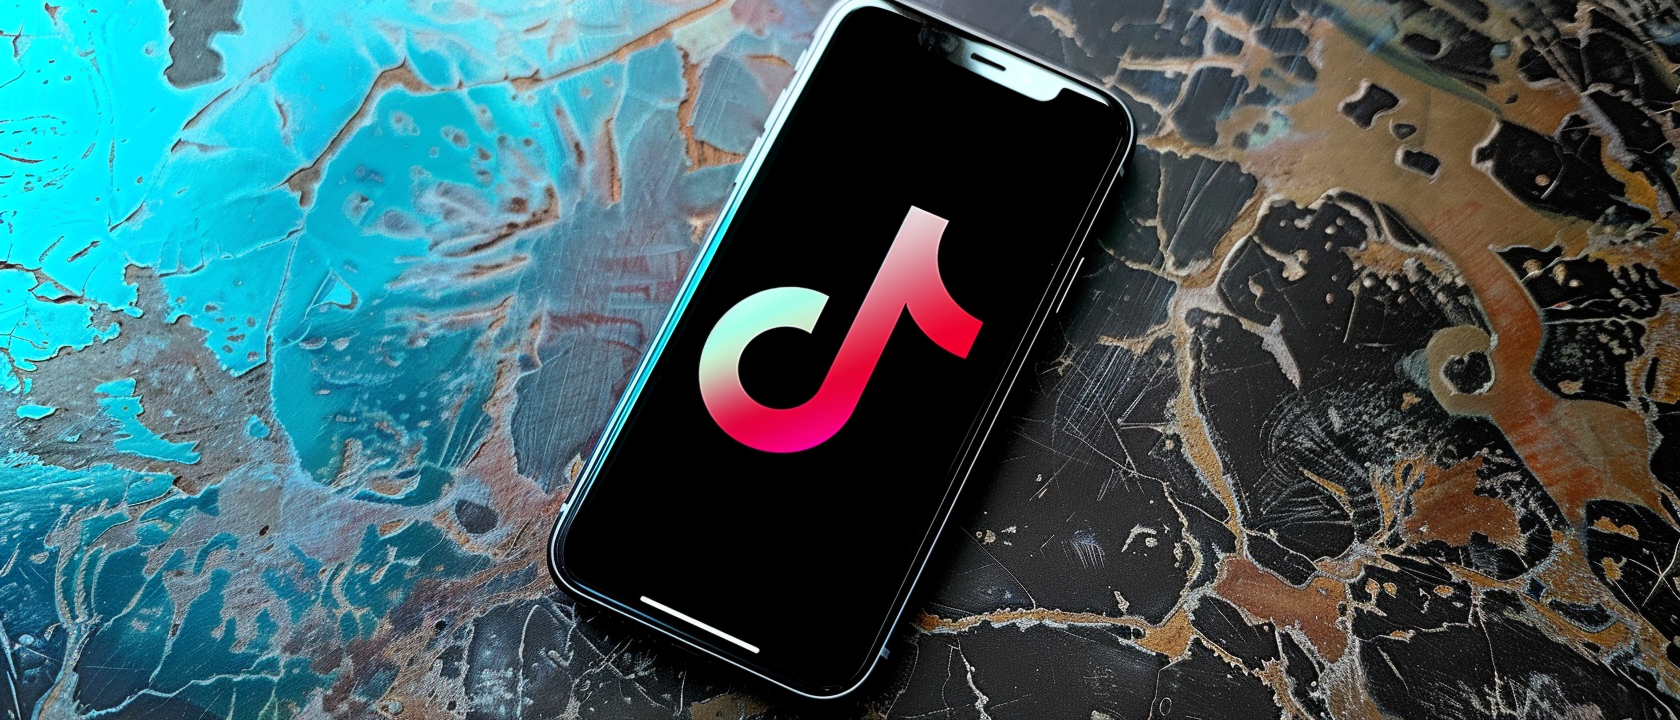 TikTok Files Lawsuit Against U.S. Government Over Law Demanding Its Sale or Ban